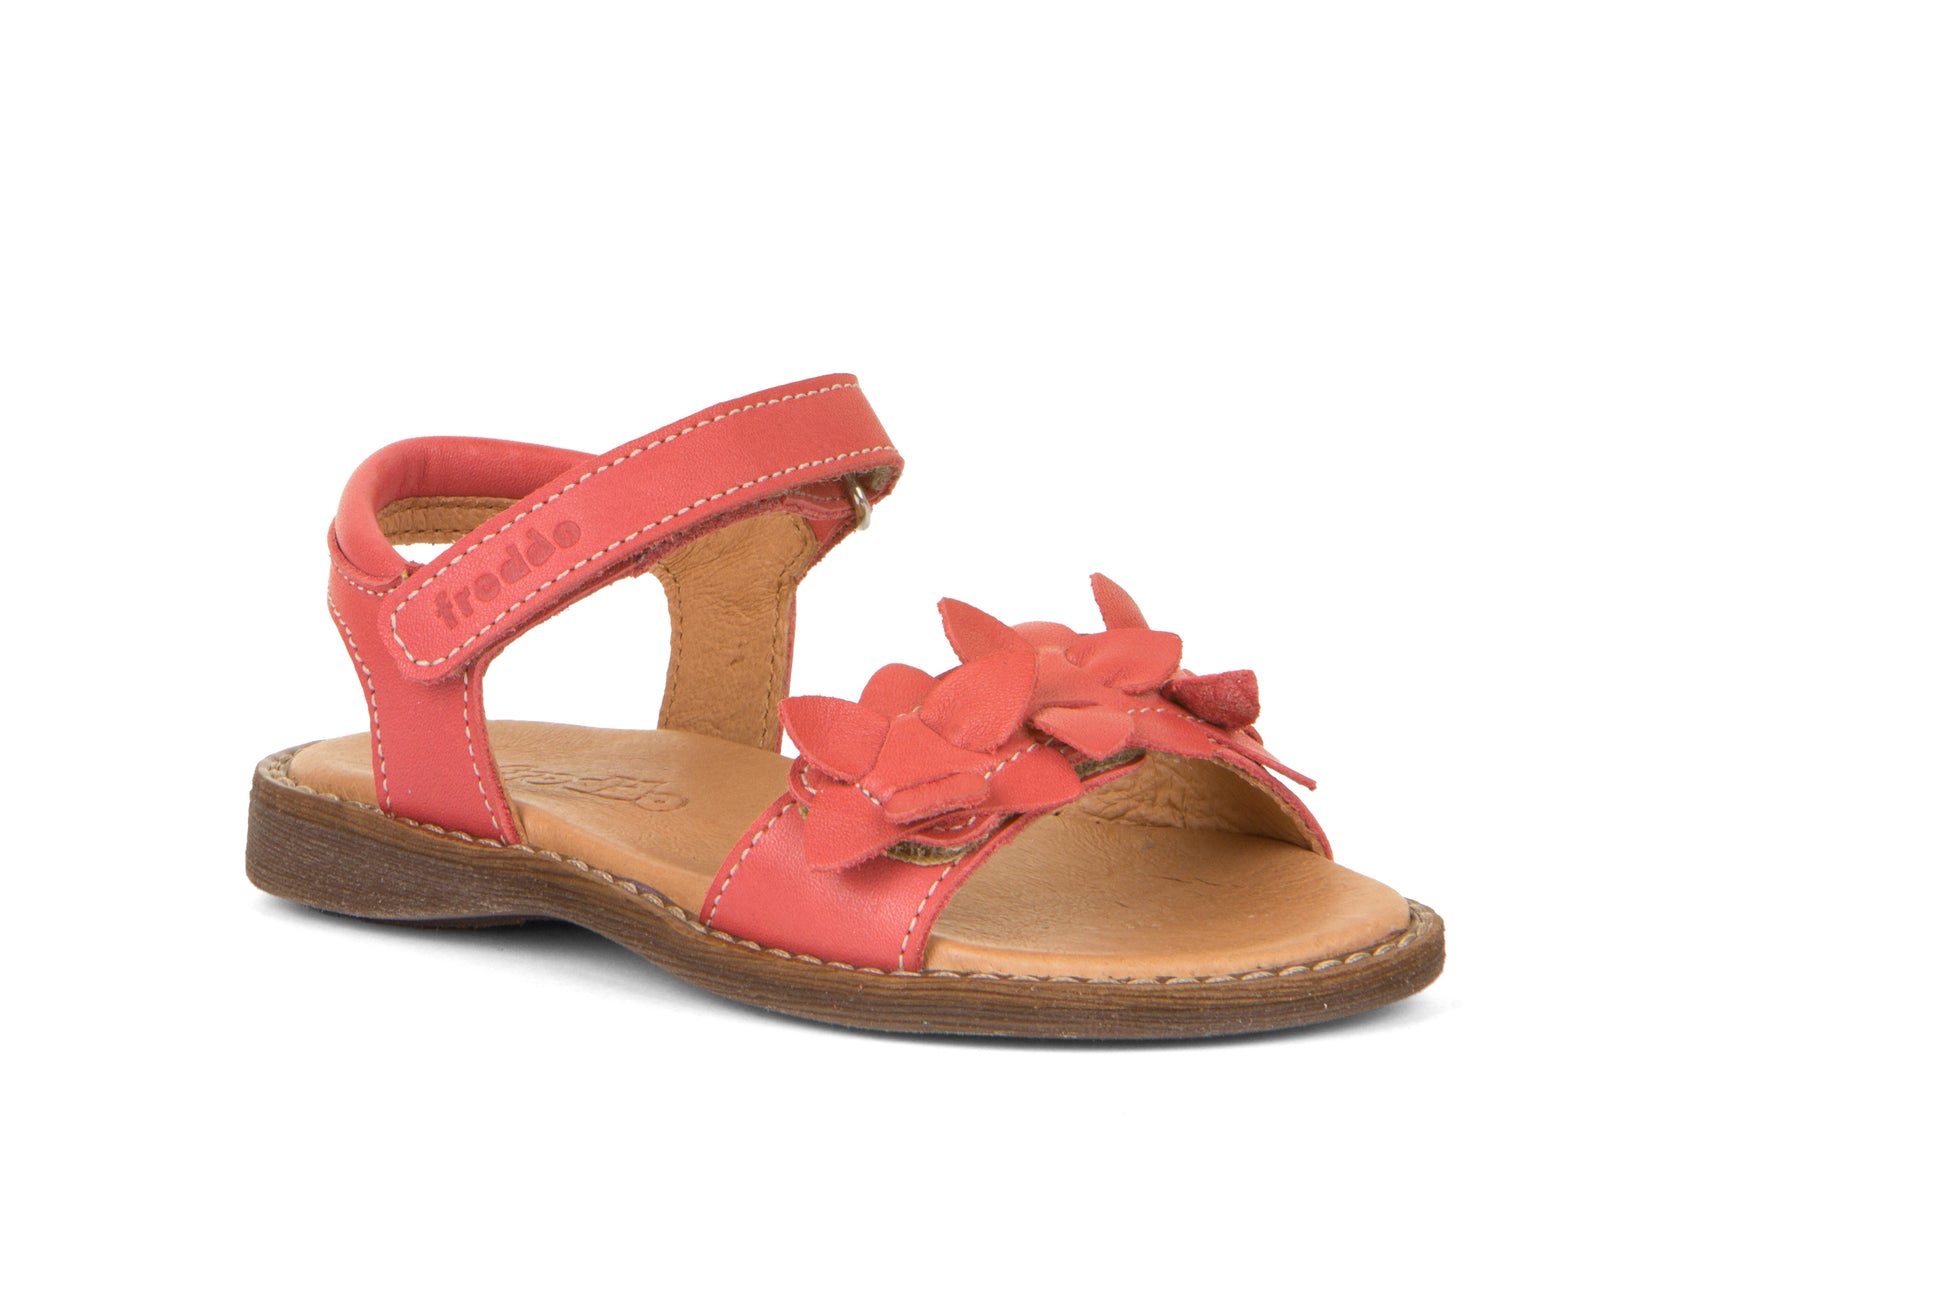 A girls sandal by Froddo, style G3150228-9 Lore Flowers, in coral with flower detail, velcro fastening. Angled view.